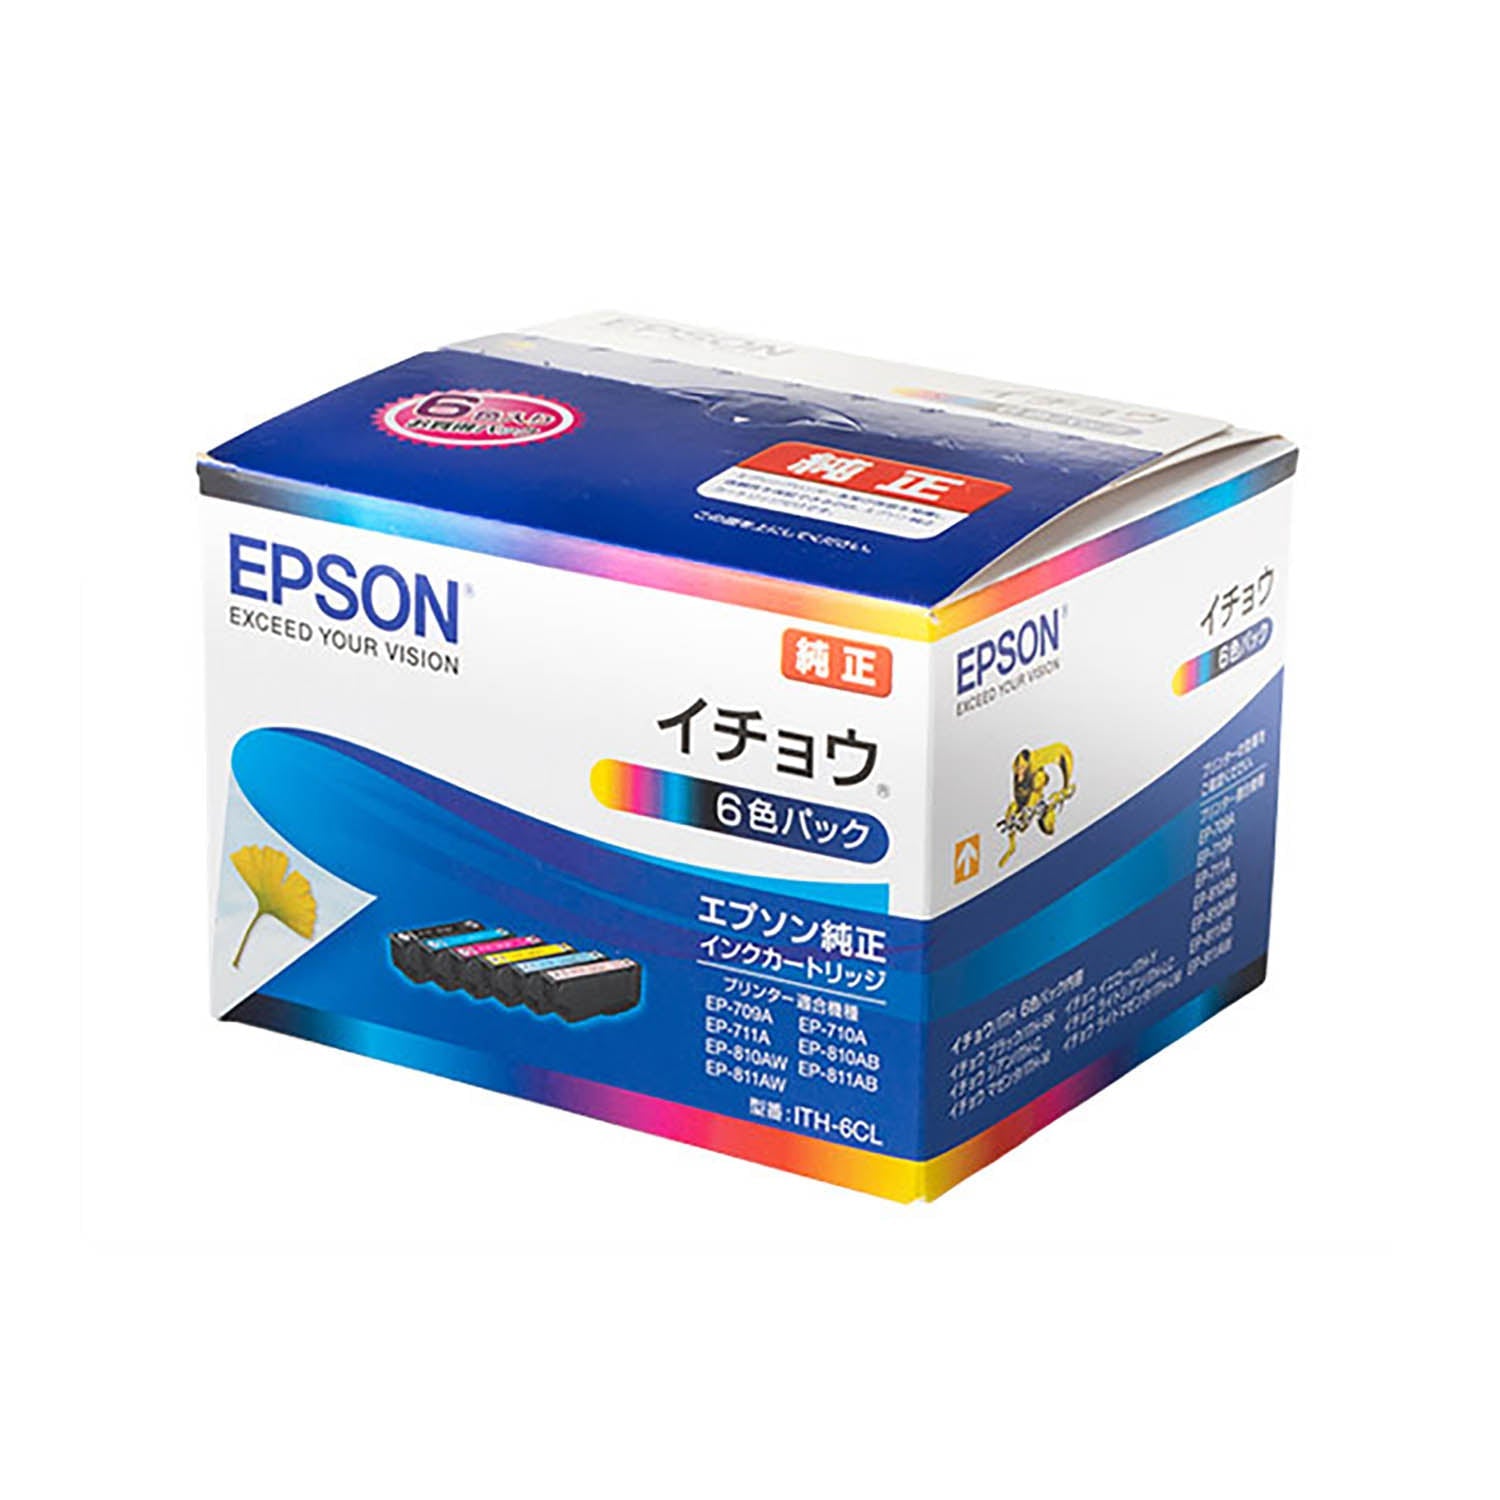 EPSON ITH-6CL 3箱セット プリンターインク 35％OFF - オフィス用品